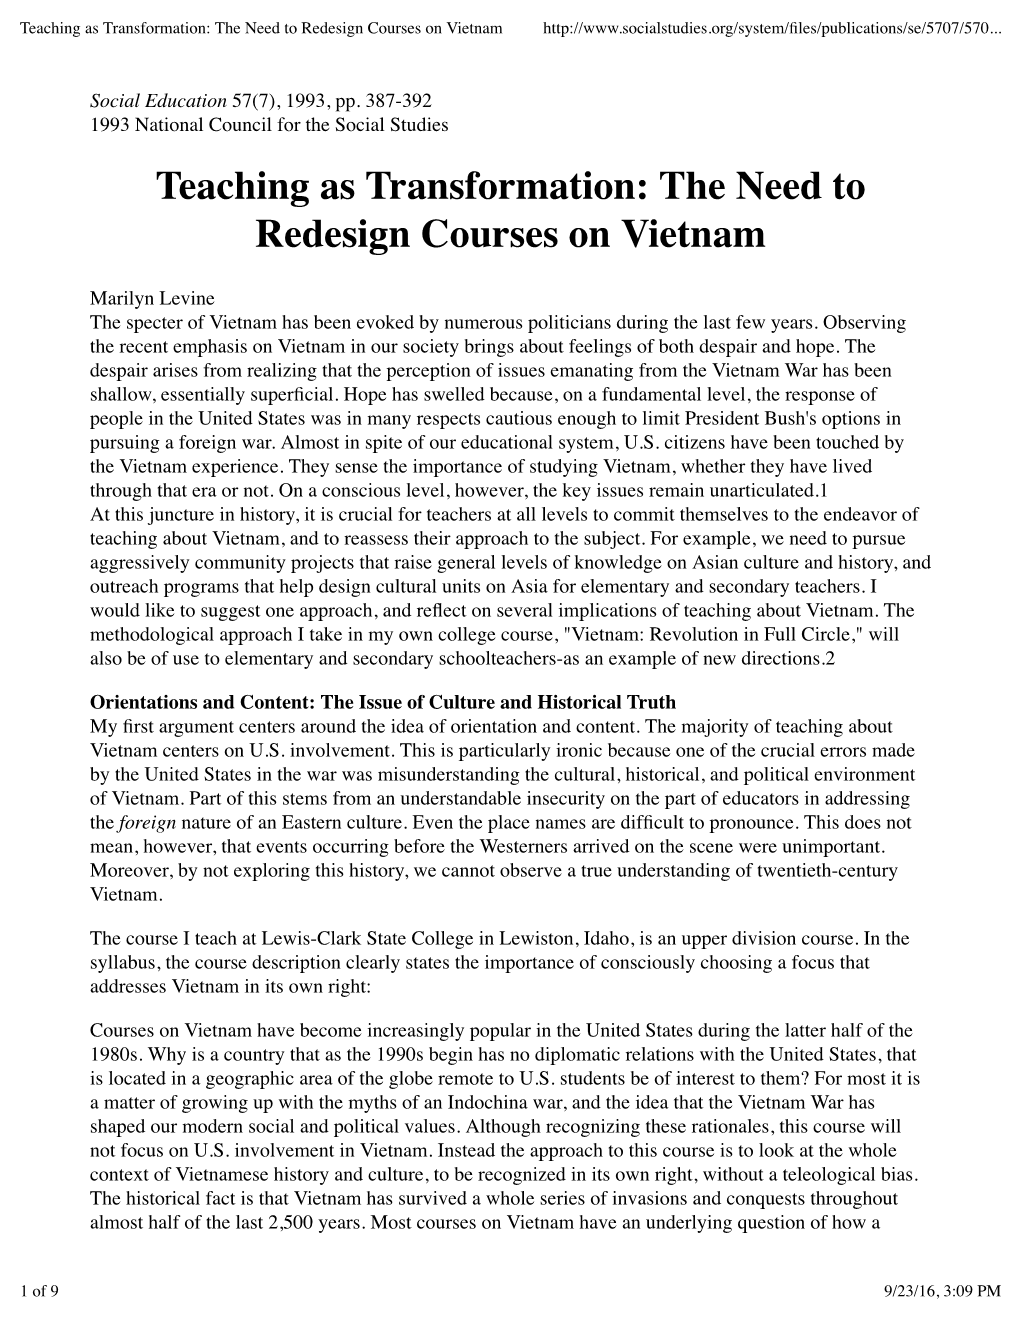 Teaching As Transformation: the Need to Redesign Courses on Vietnam